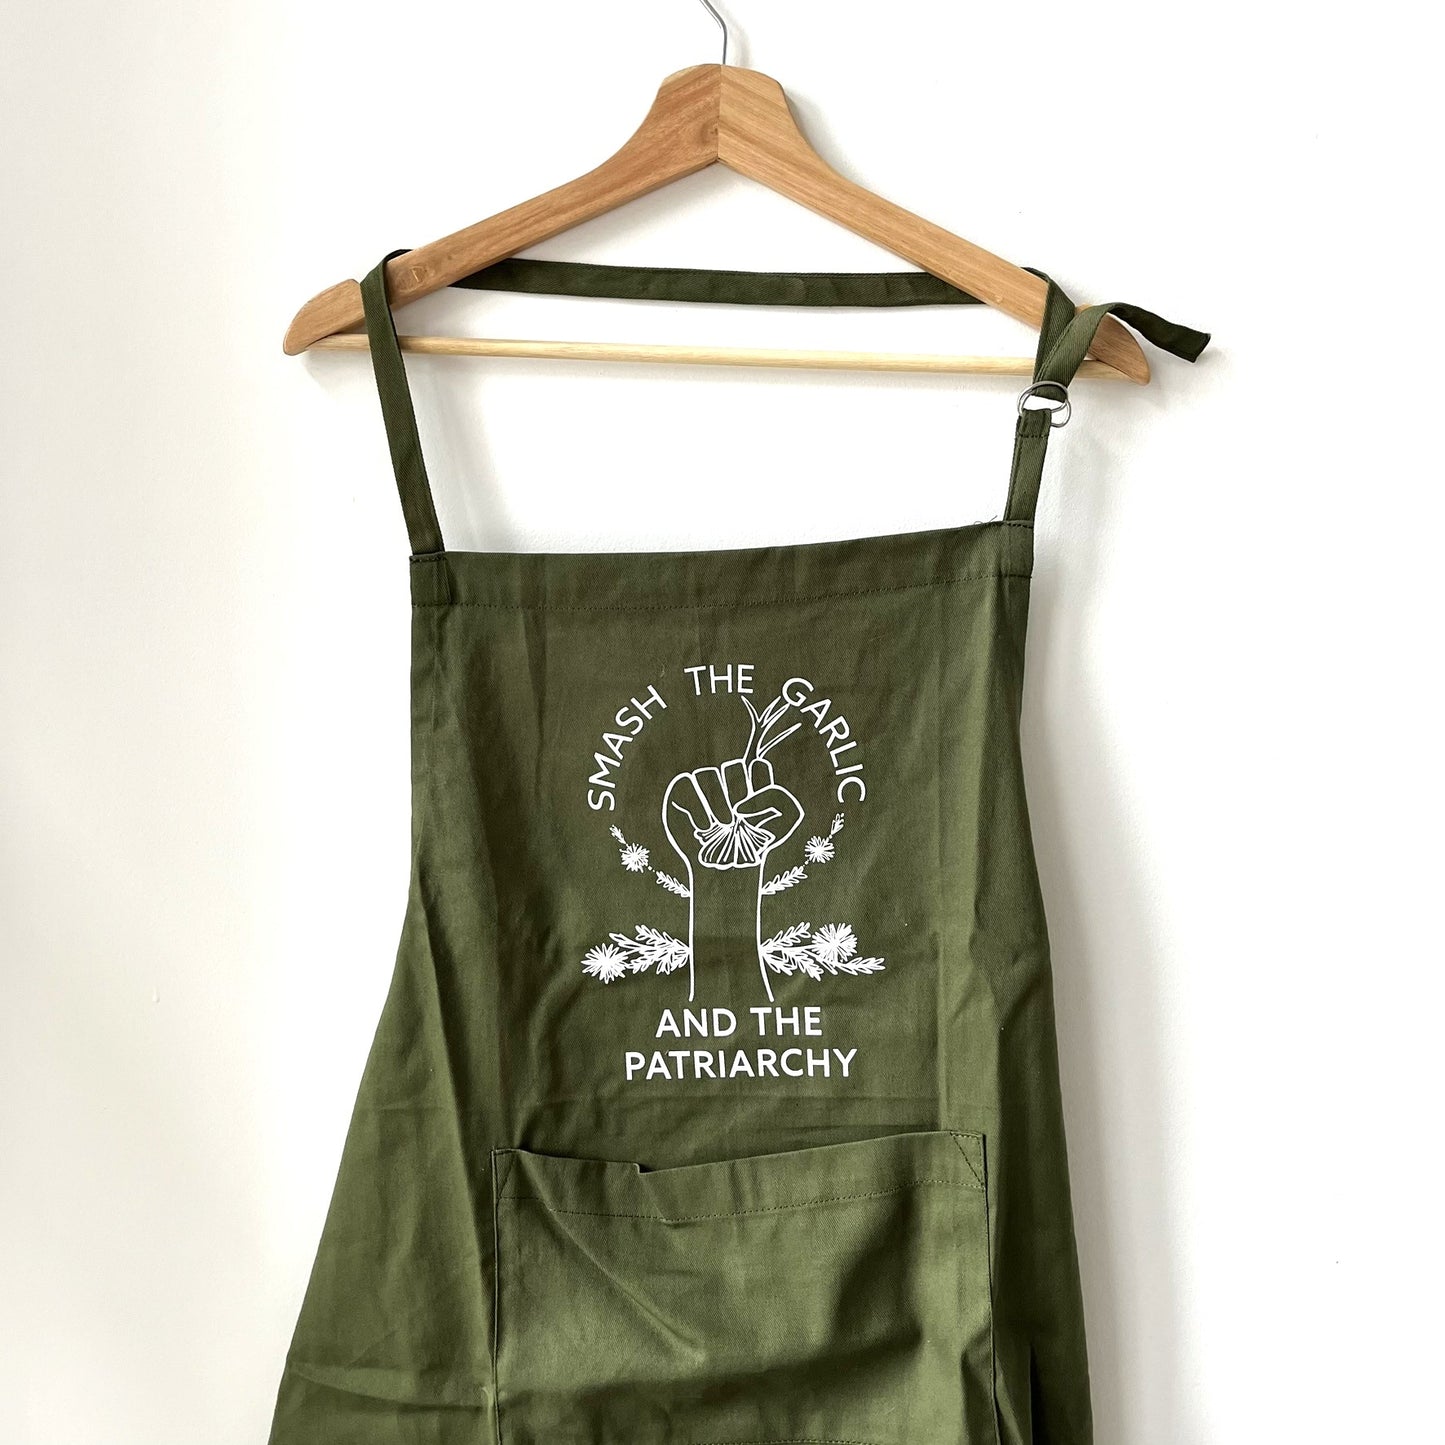 Apron - Smash the Garlic and The Patriarchy